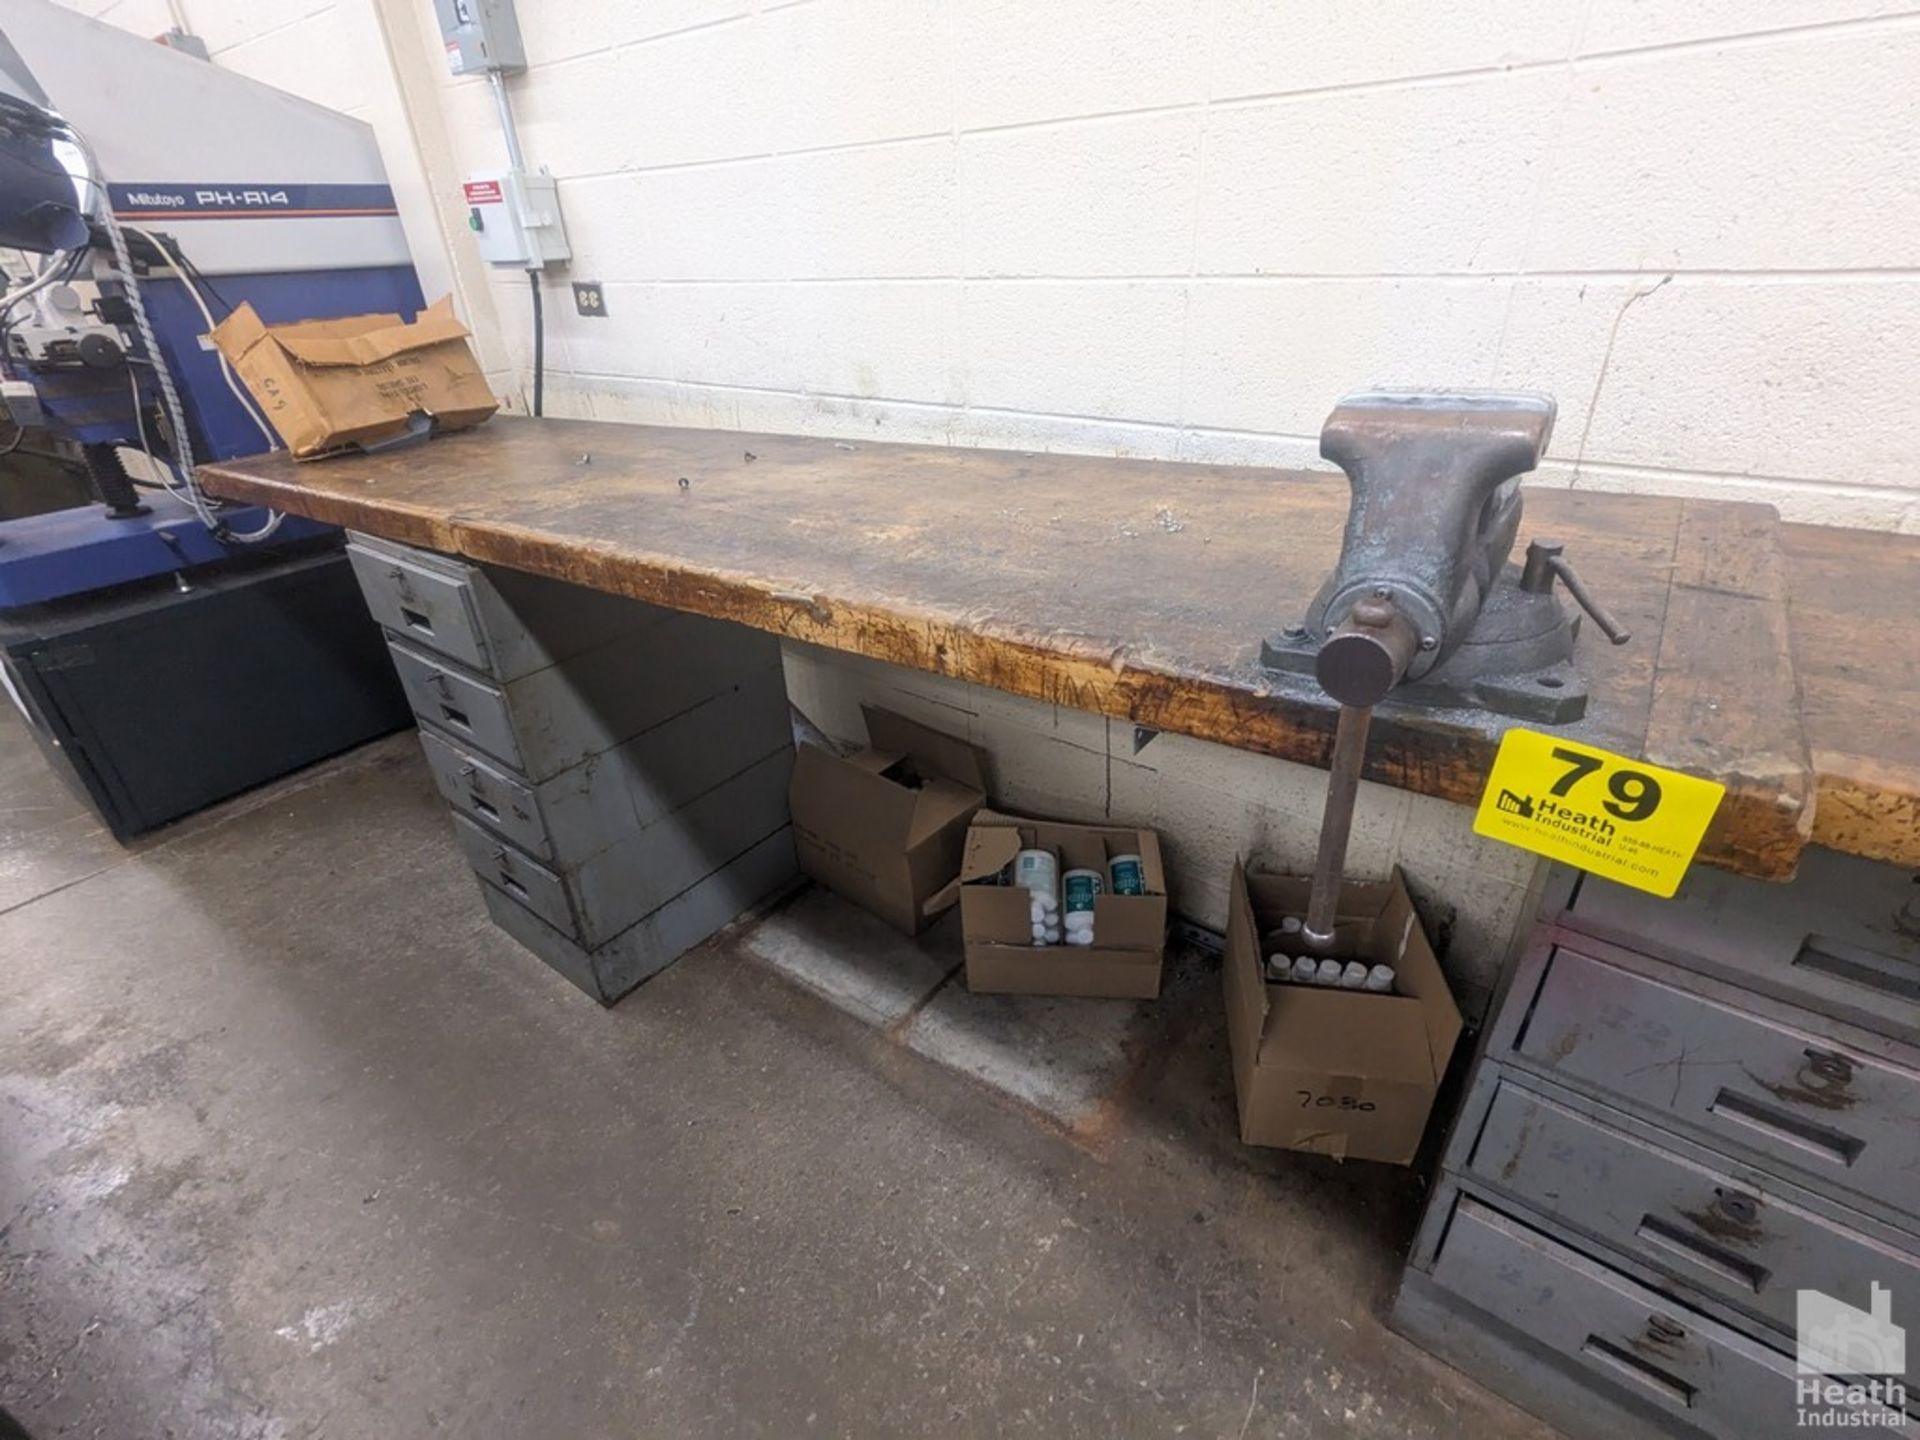 WORKBENCH TOP WITH FOUR DRAWER CABINET BASE AND 4" BULLET STYLE VISE 8' X 2' Loading Fee :$125